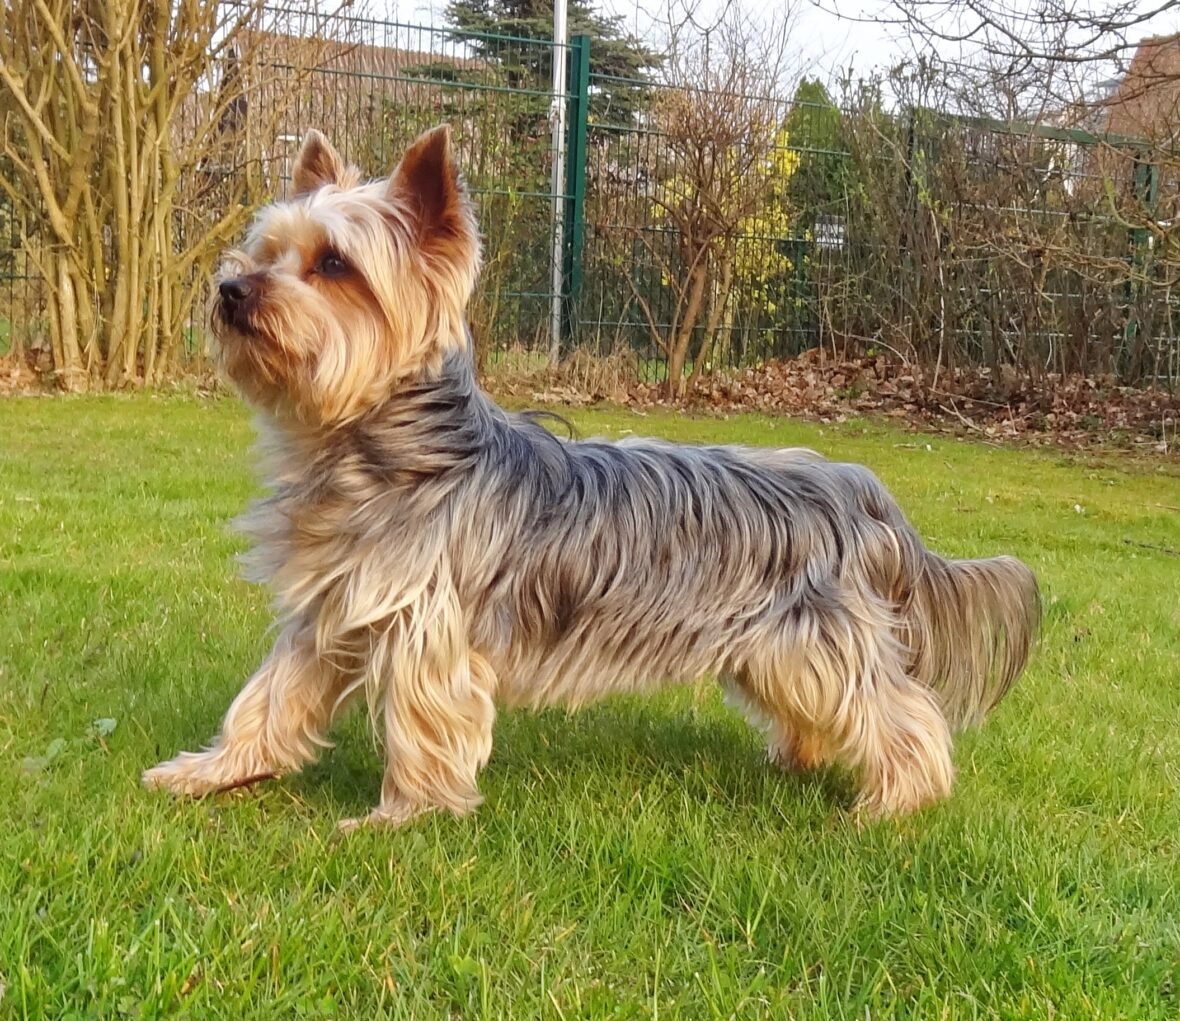 A Yorkshire Terrier standing on the grass, Yorkies are among the best small guard dogs to own